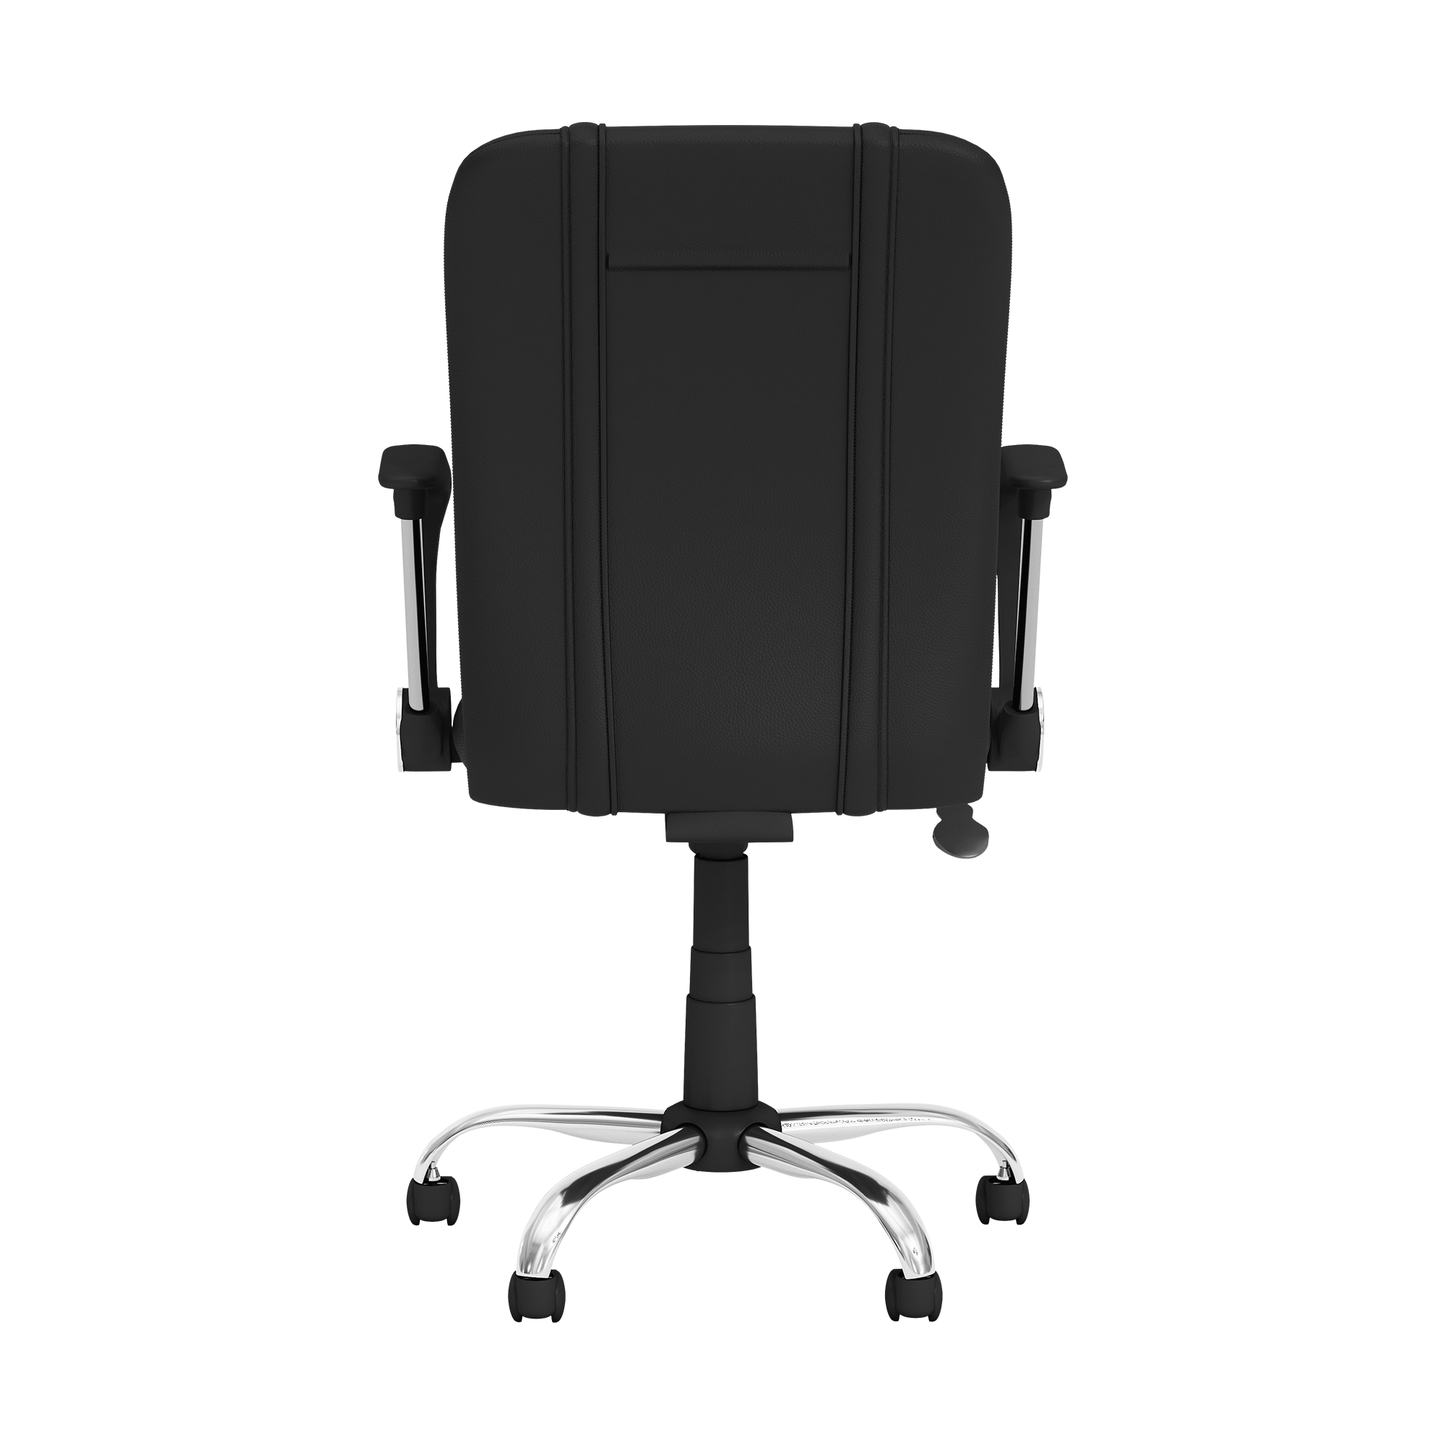 Curve Task Chair with Corvette Coupe Logo